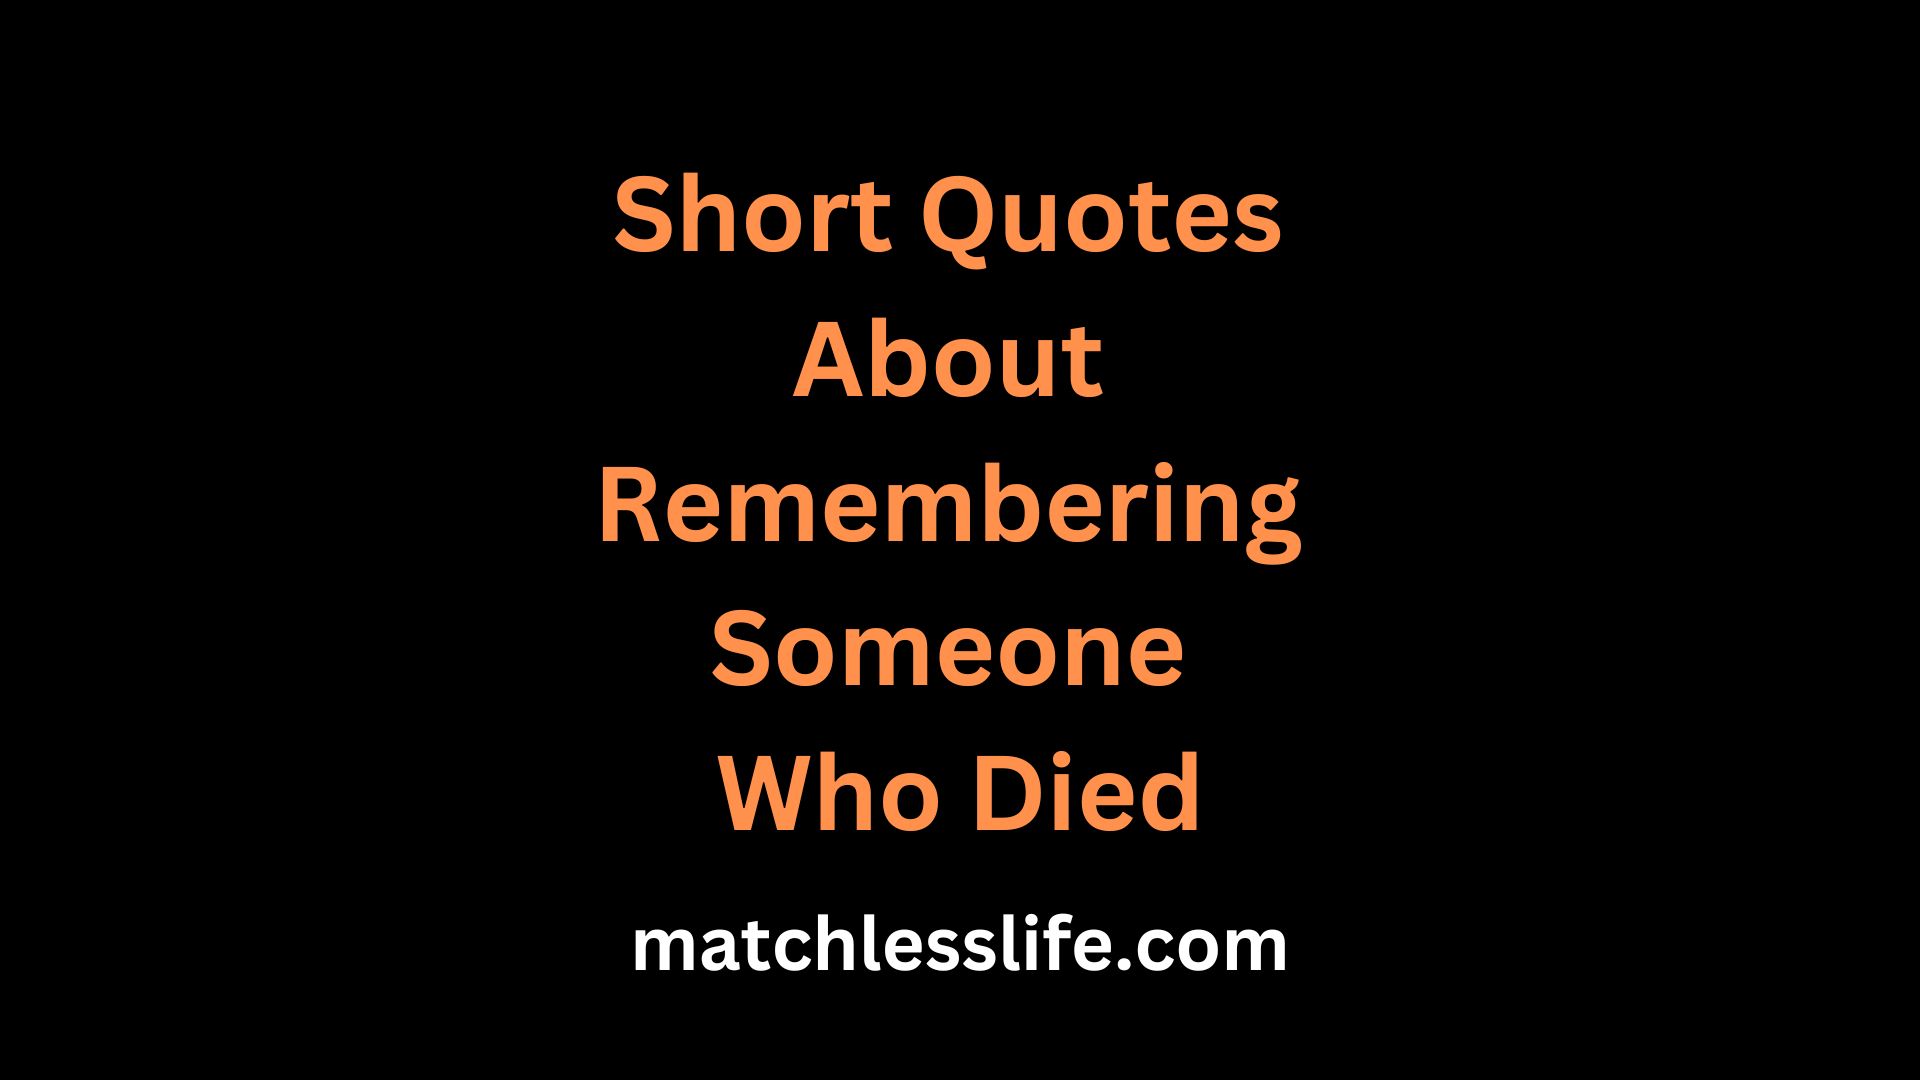 Short Quotes About Remembering Someone Who Died